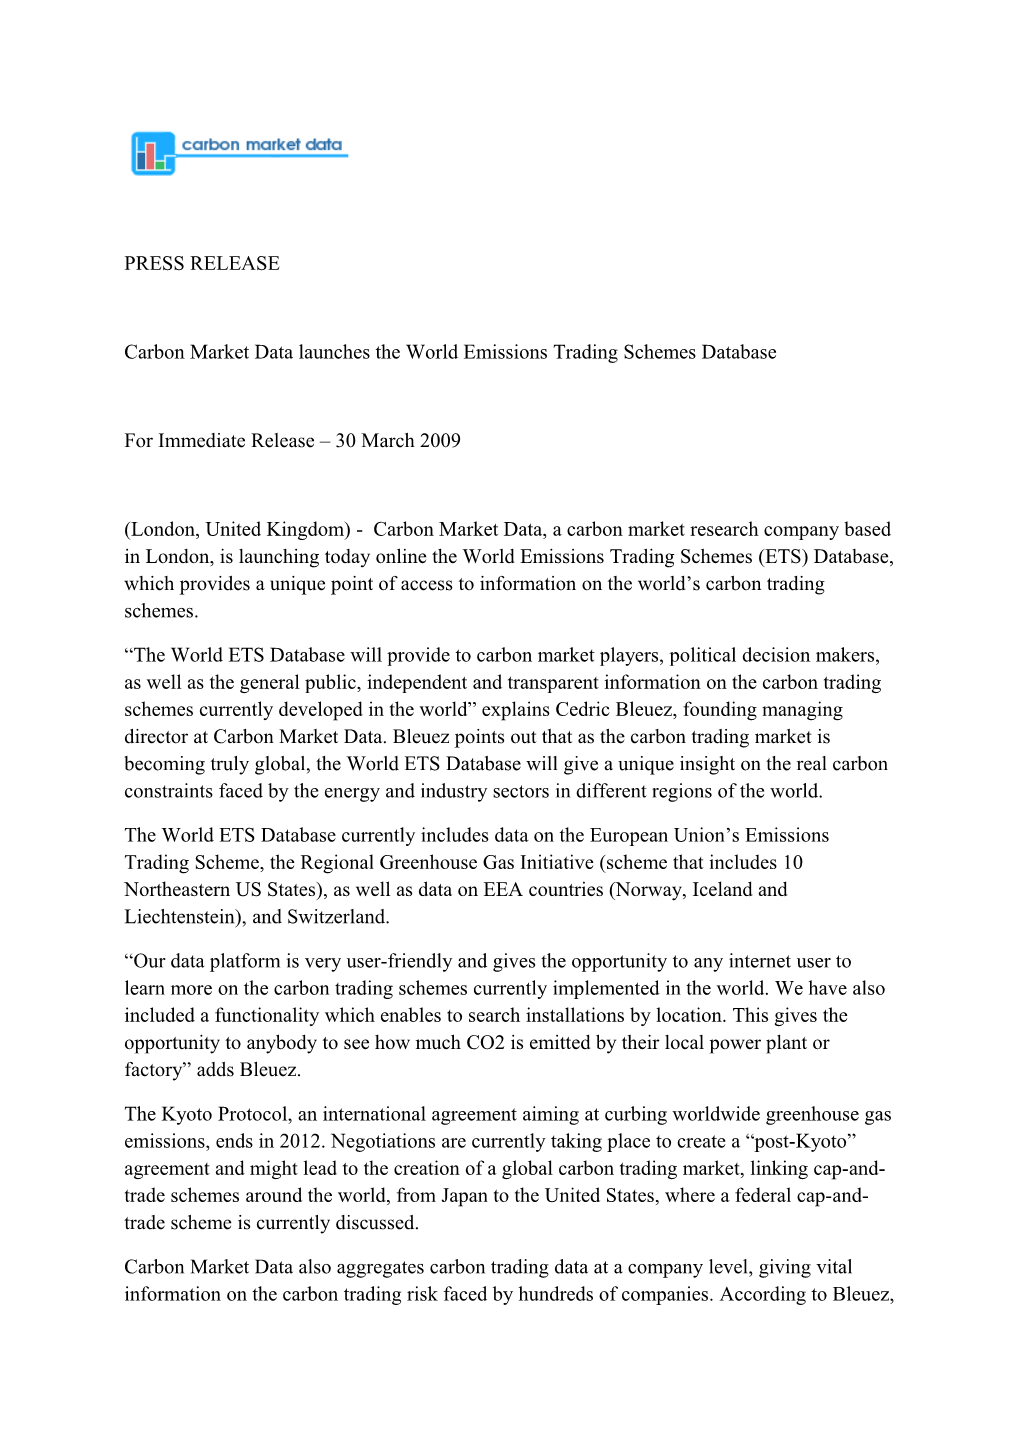 Titre: PRESS RELEASE: Carbon Market Data Launches the World Emissions Trading Schemes Database